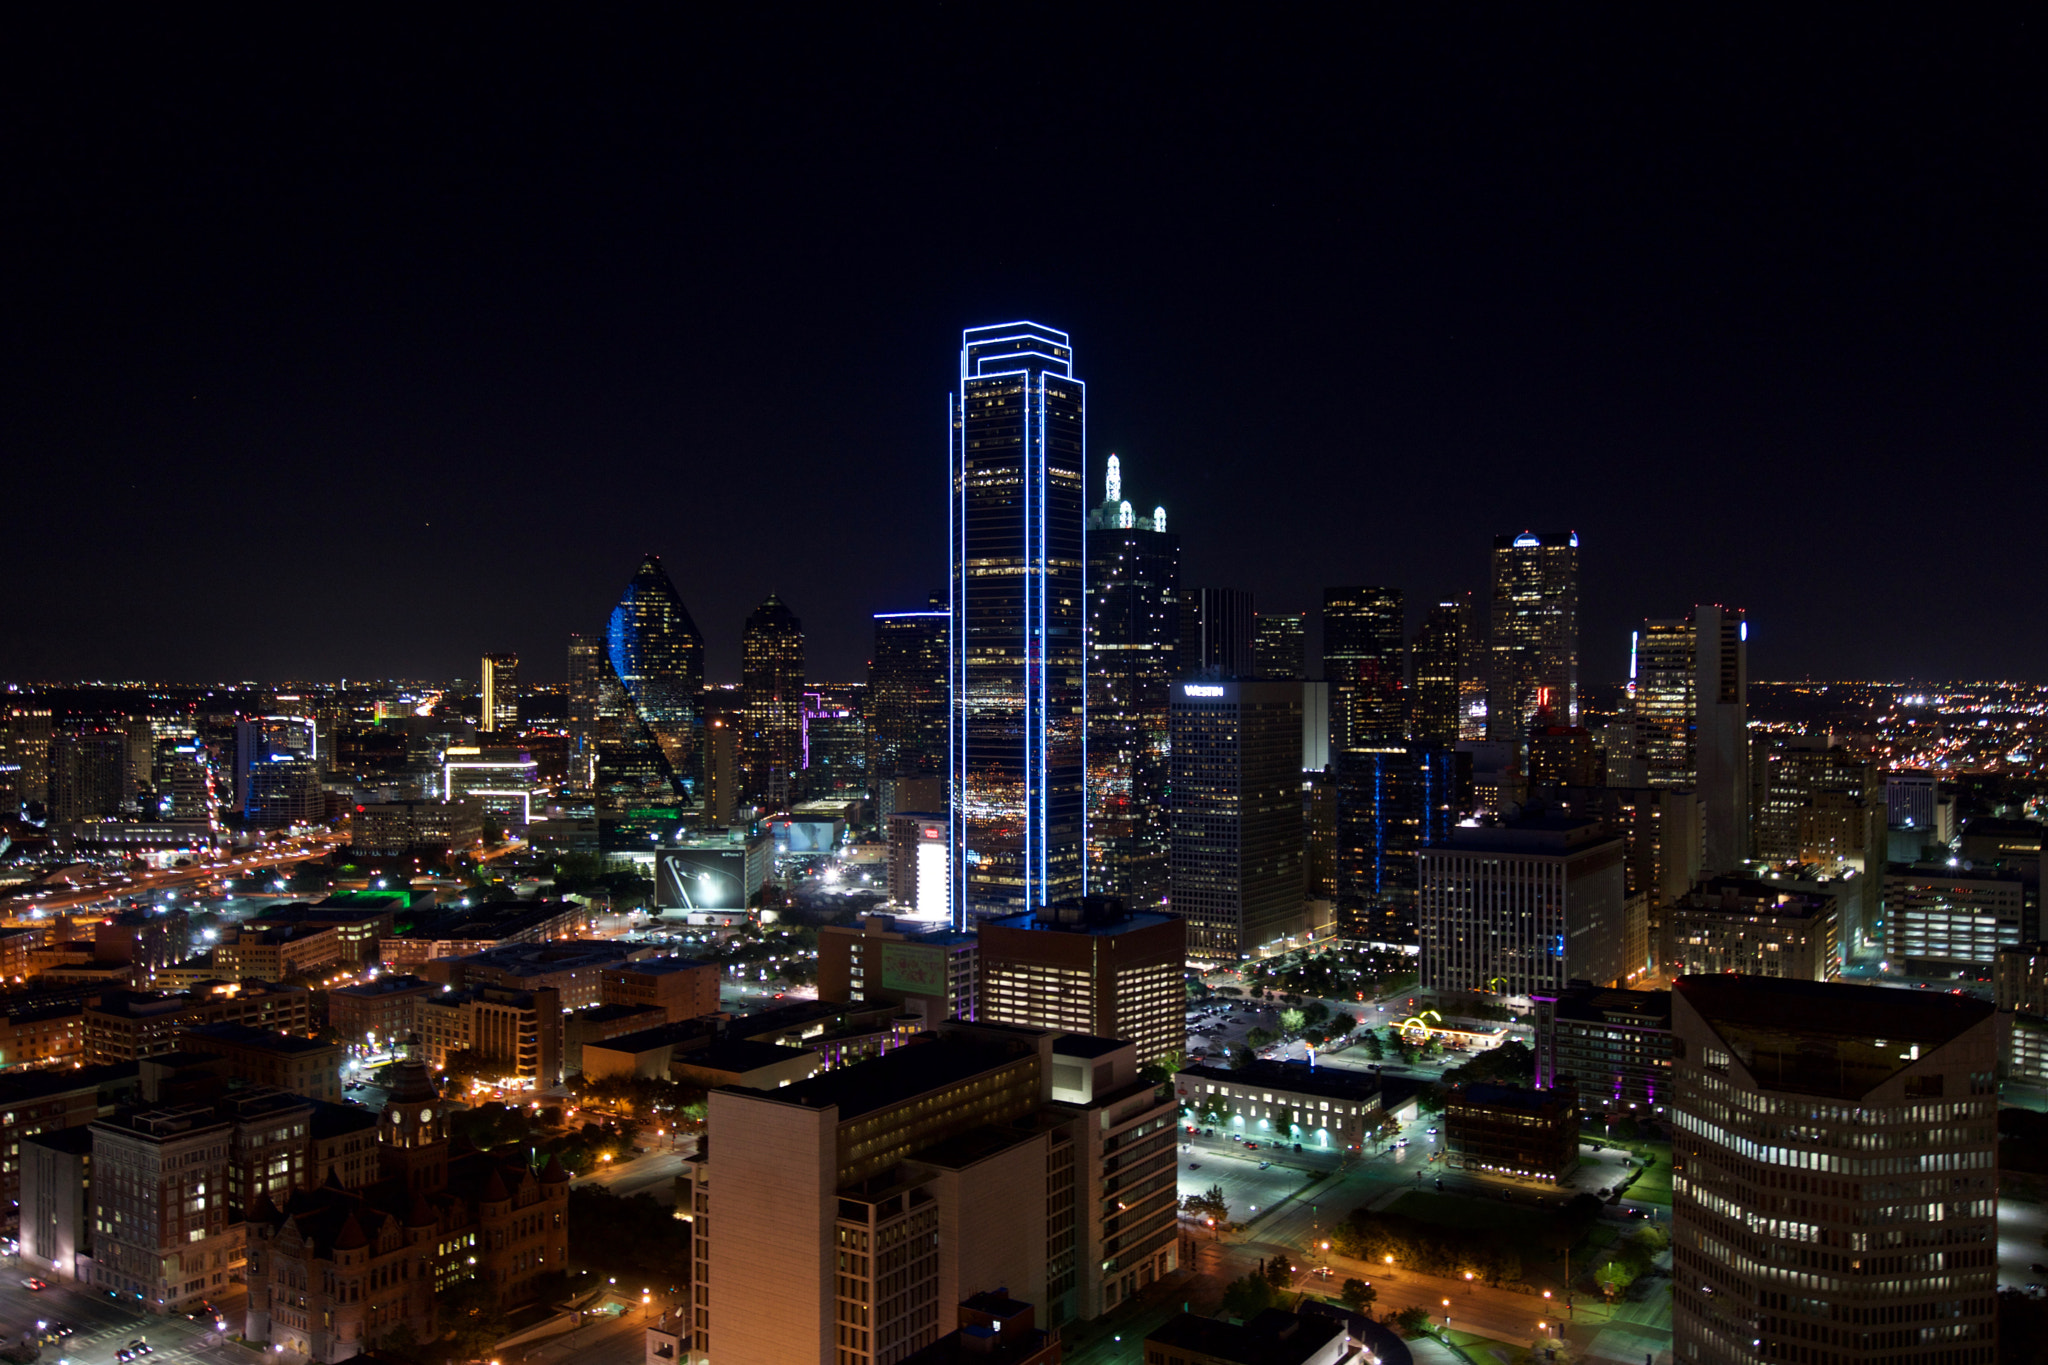 Sony a7 sample photo. Dallas by night photography